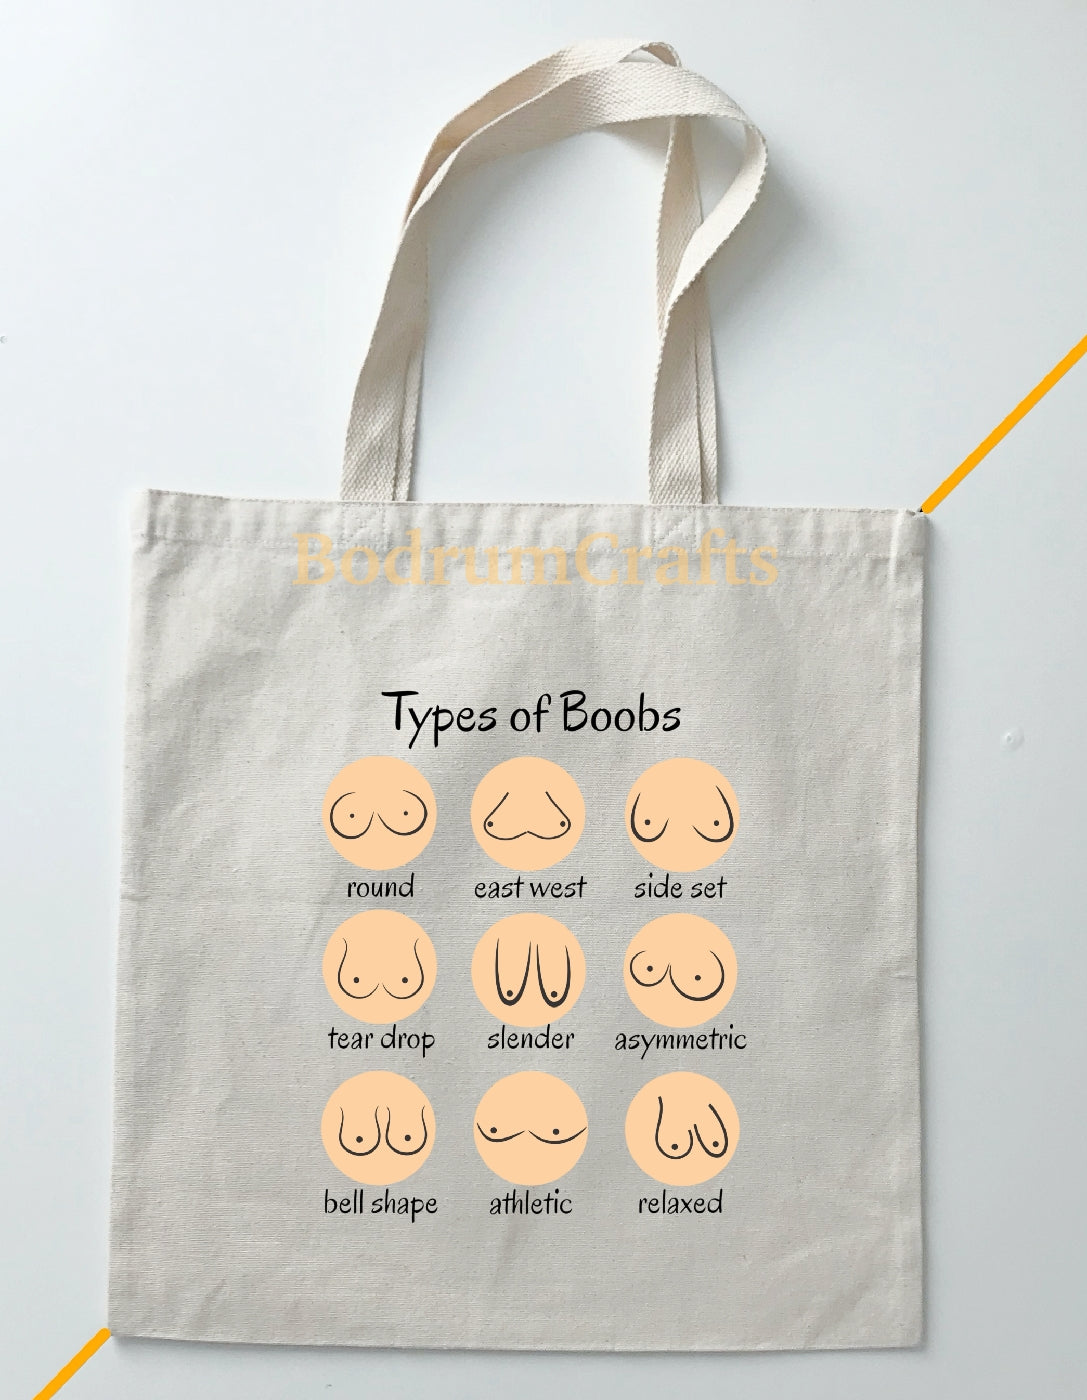 Funny Custom Design Canvas Tote Bags, Boobs Printed Cute Gift Bags